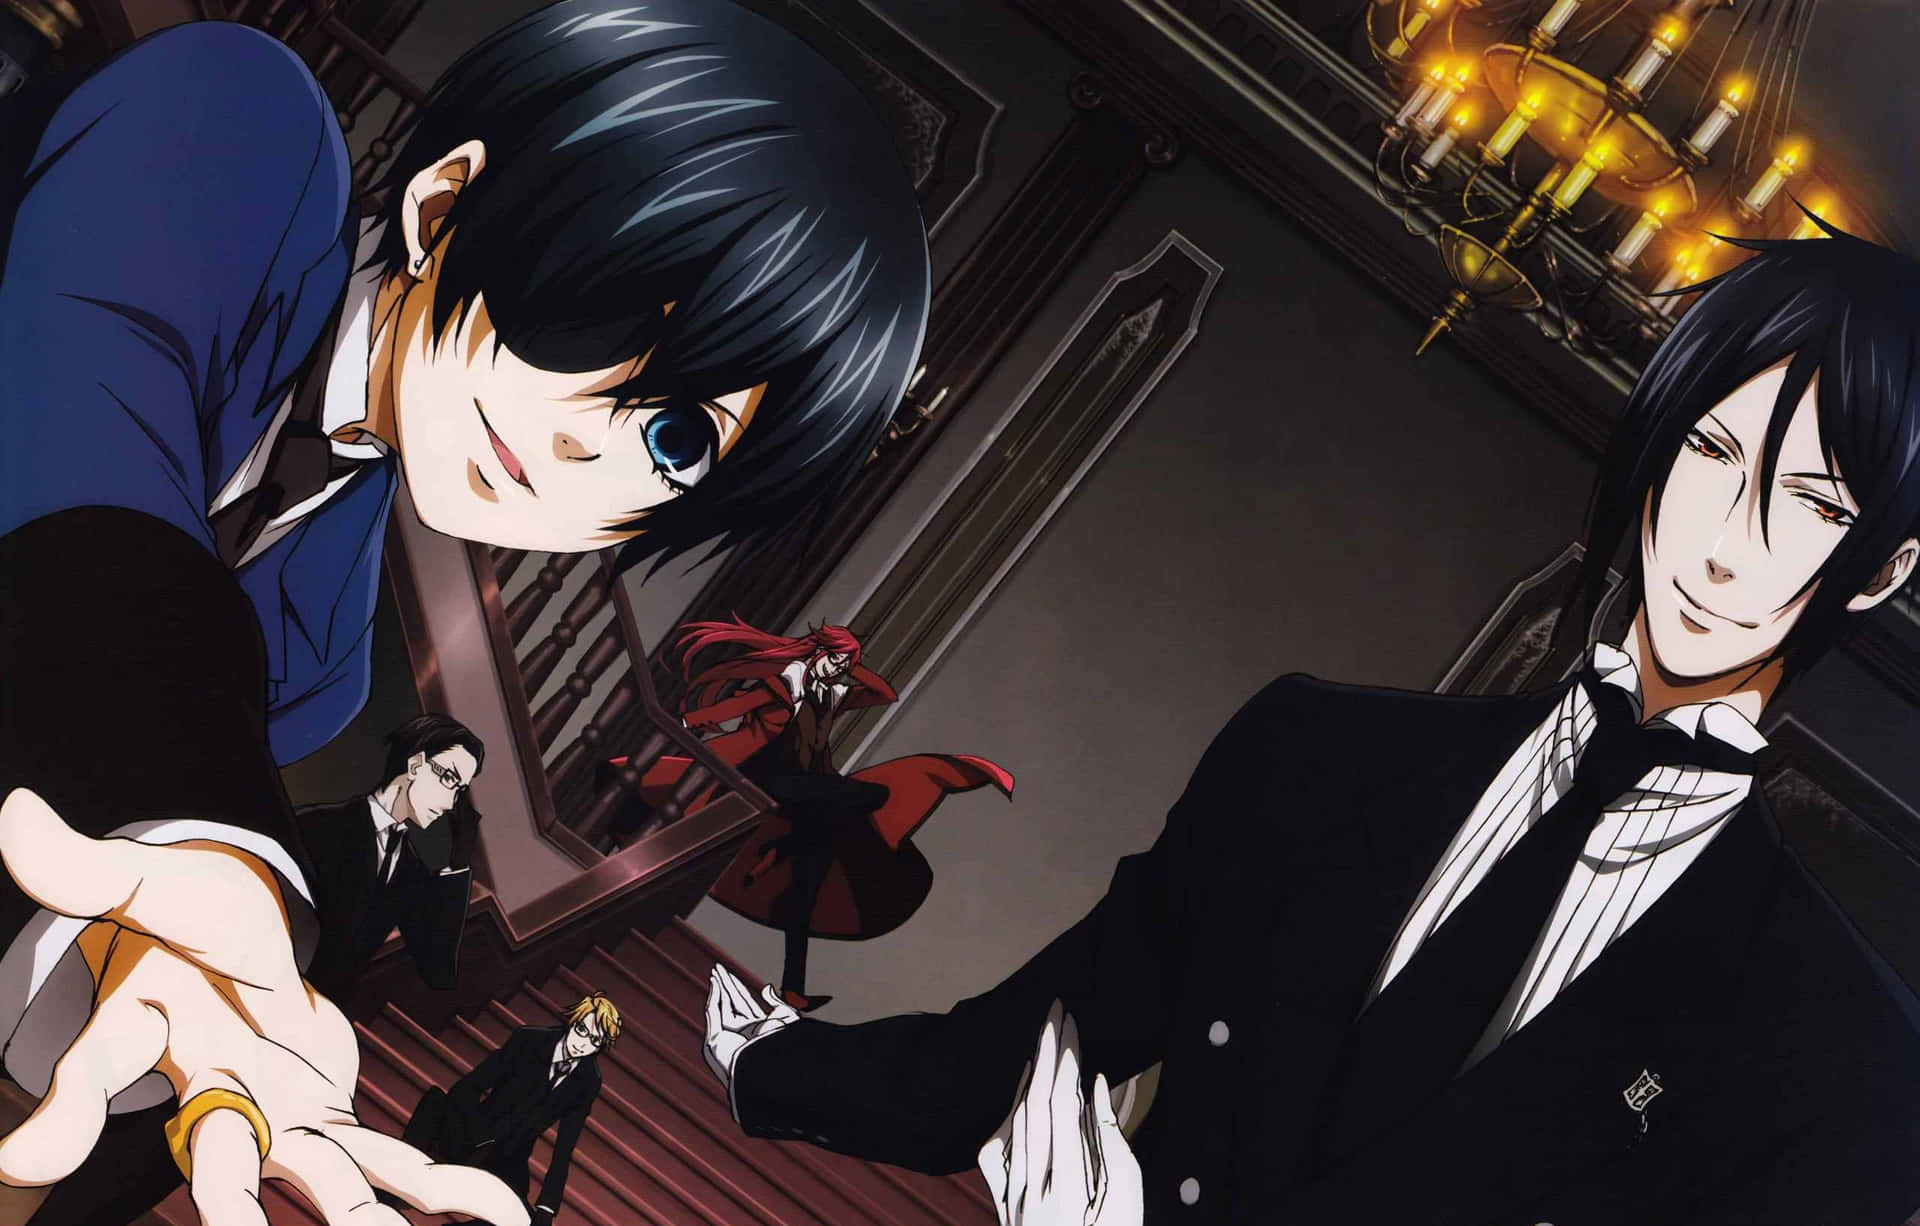 “Welcome to the dark world of Black Butler.”